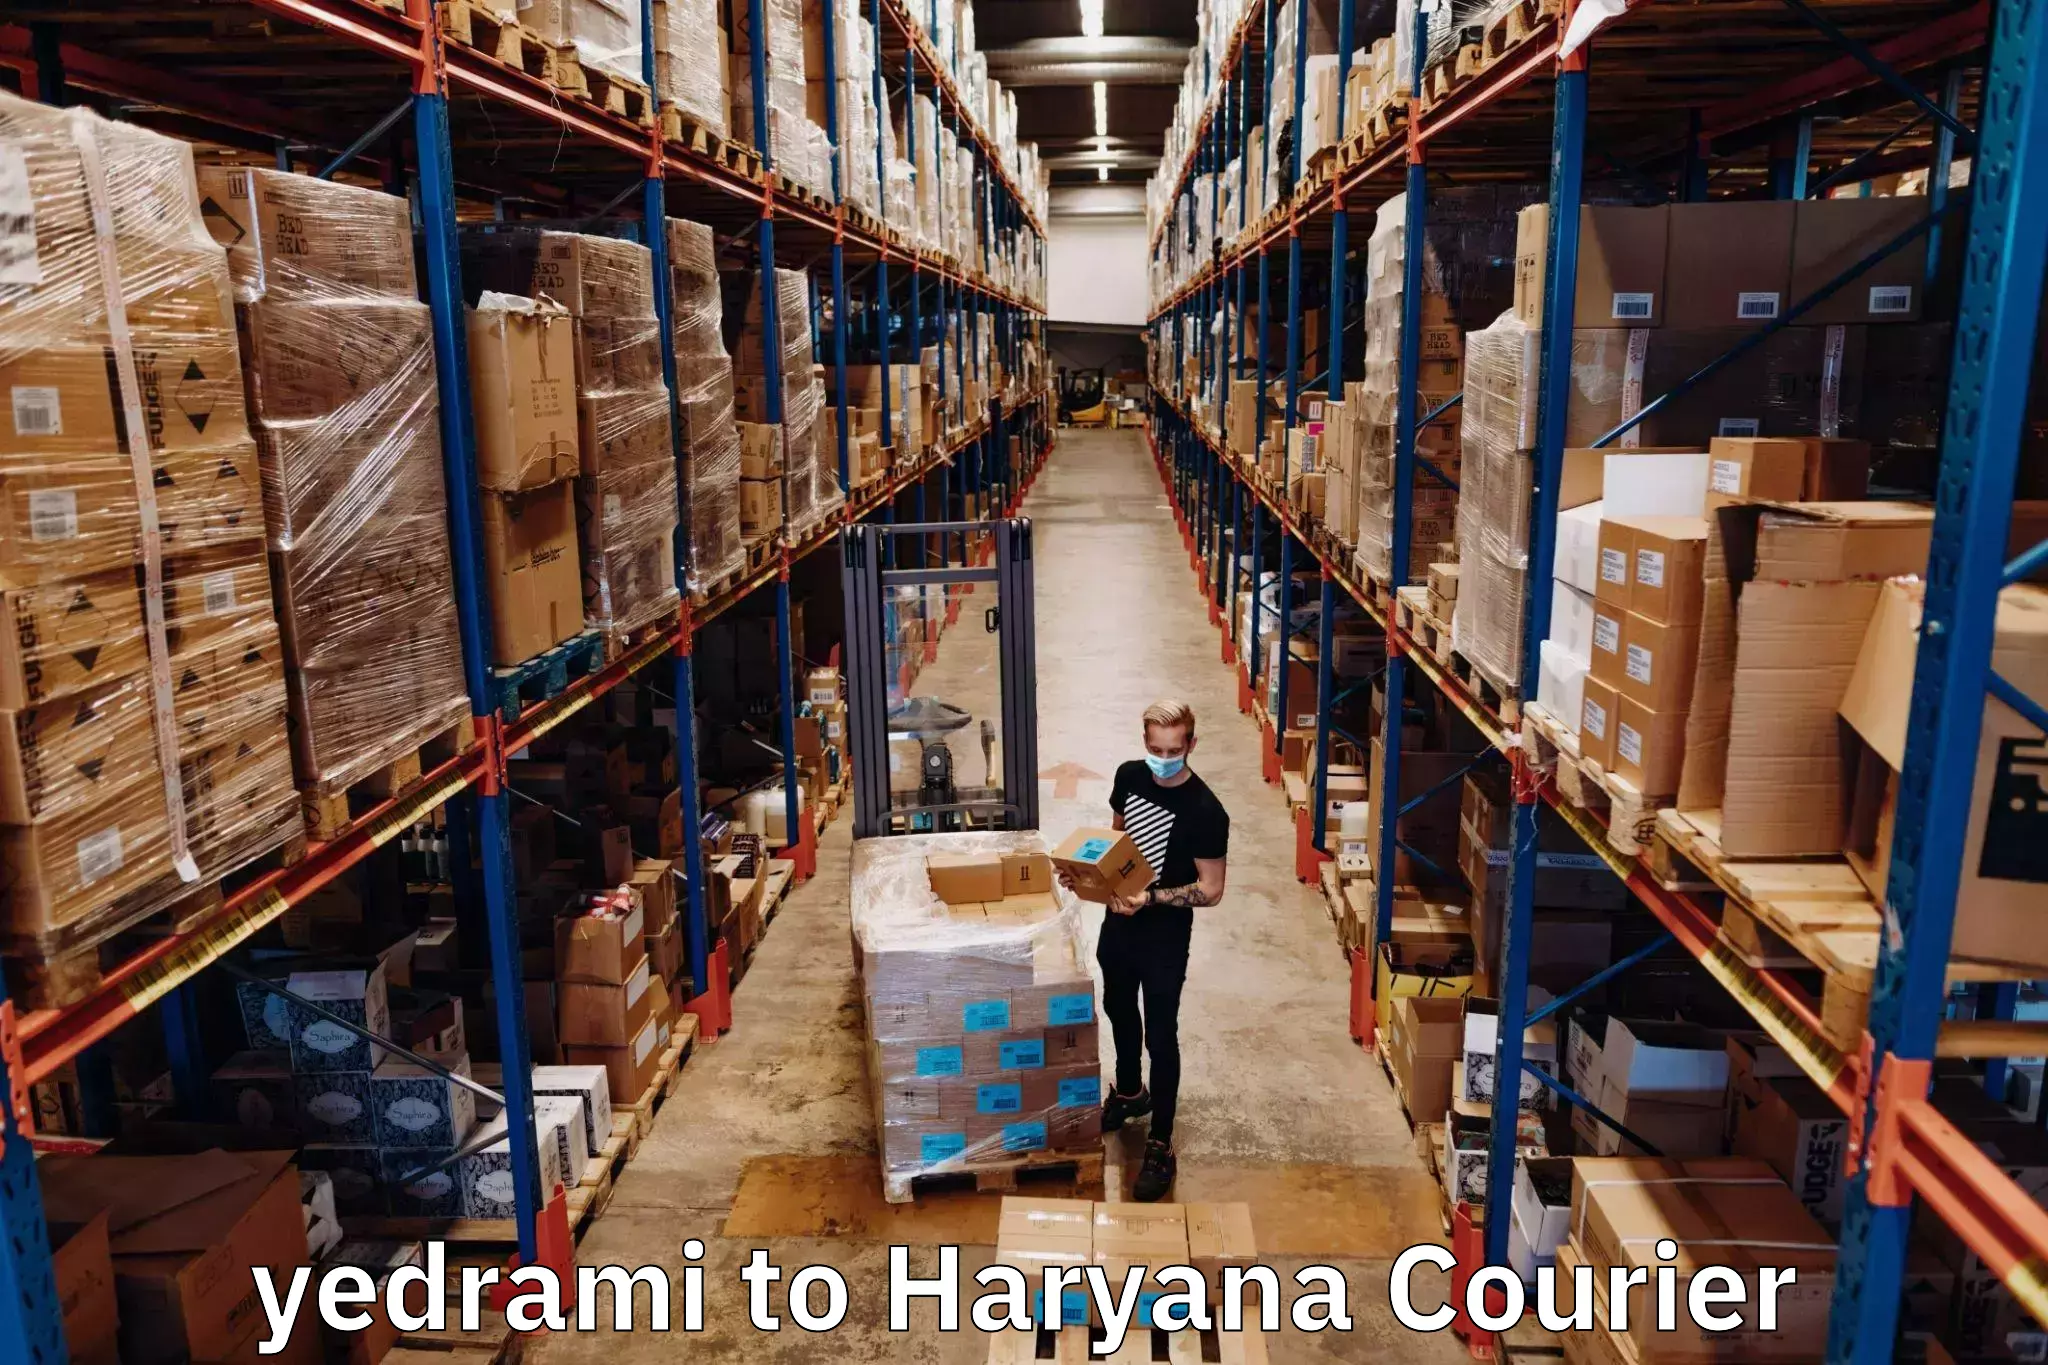 Reliable courier service yedrami to Bhiwani